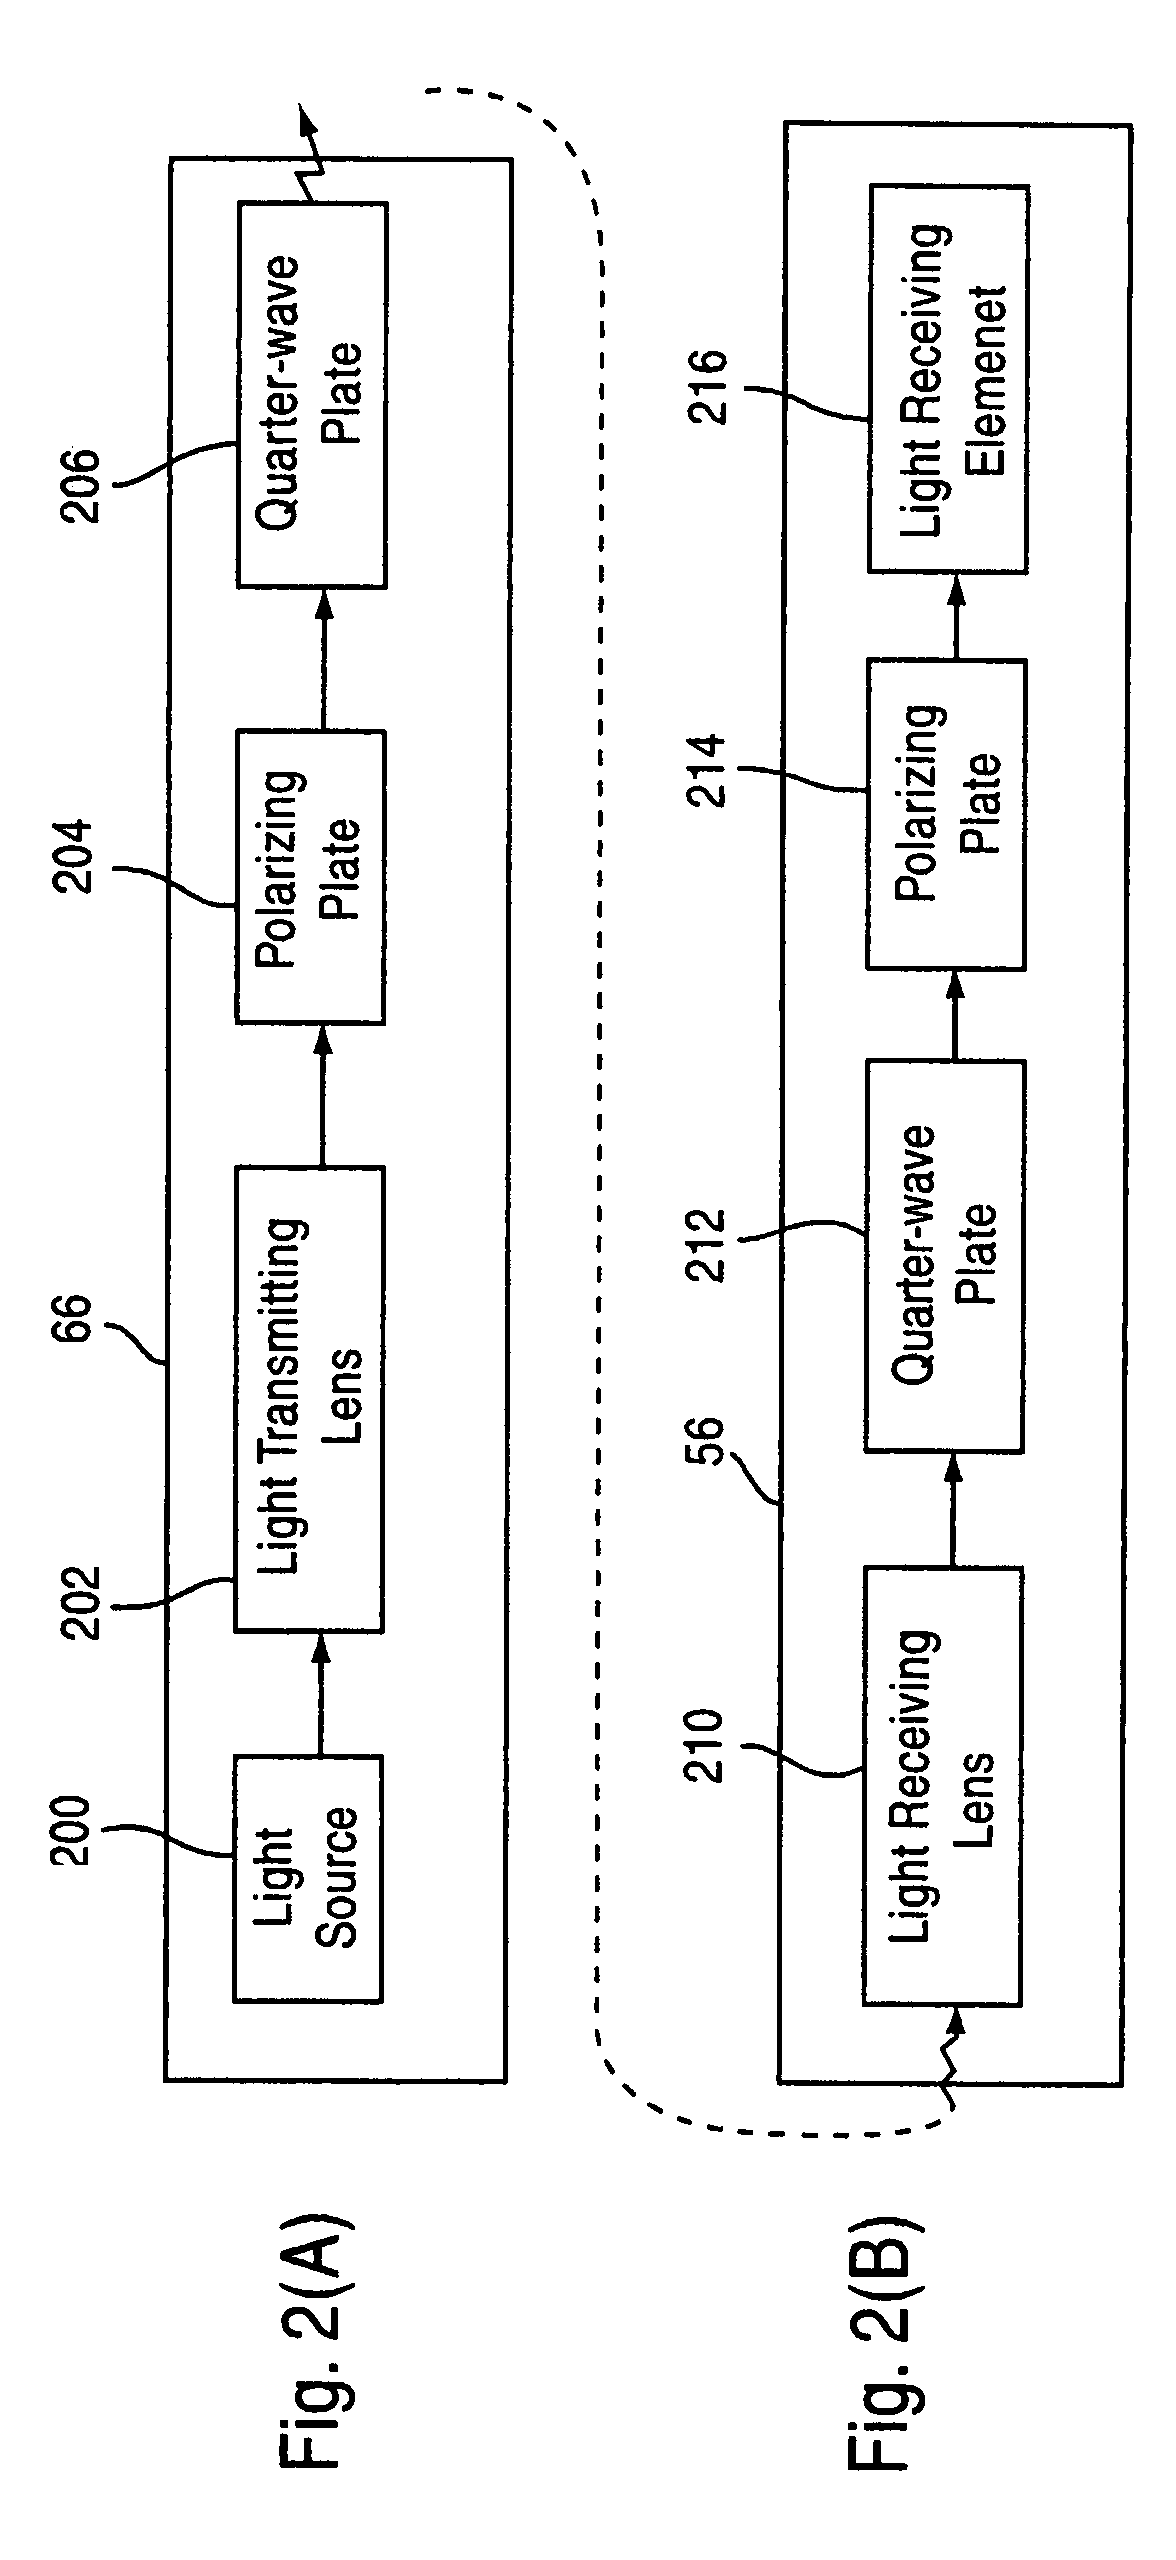 Survey system capable of remotely controlling a surveying instrument